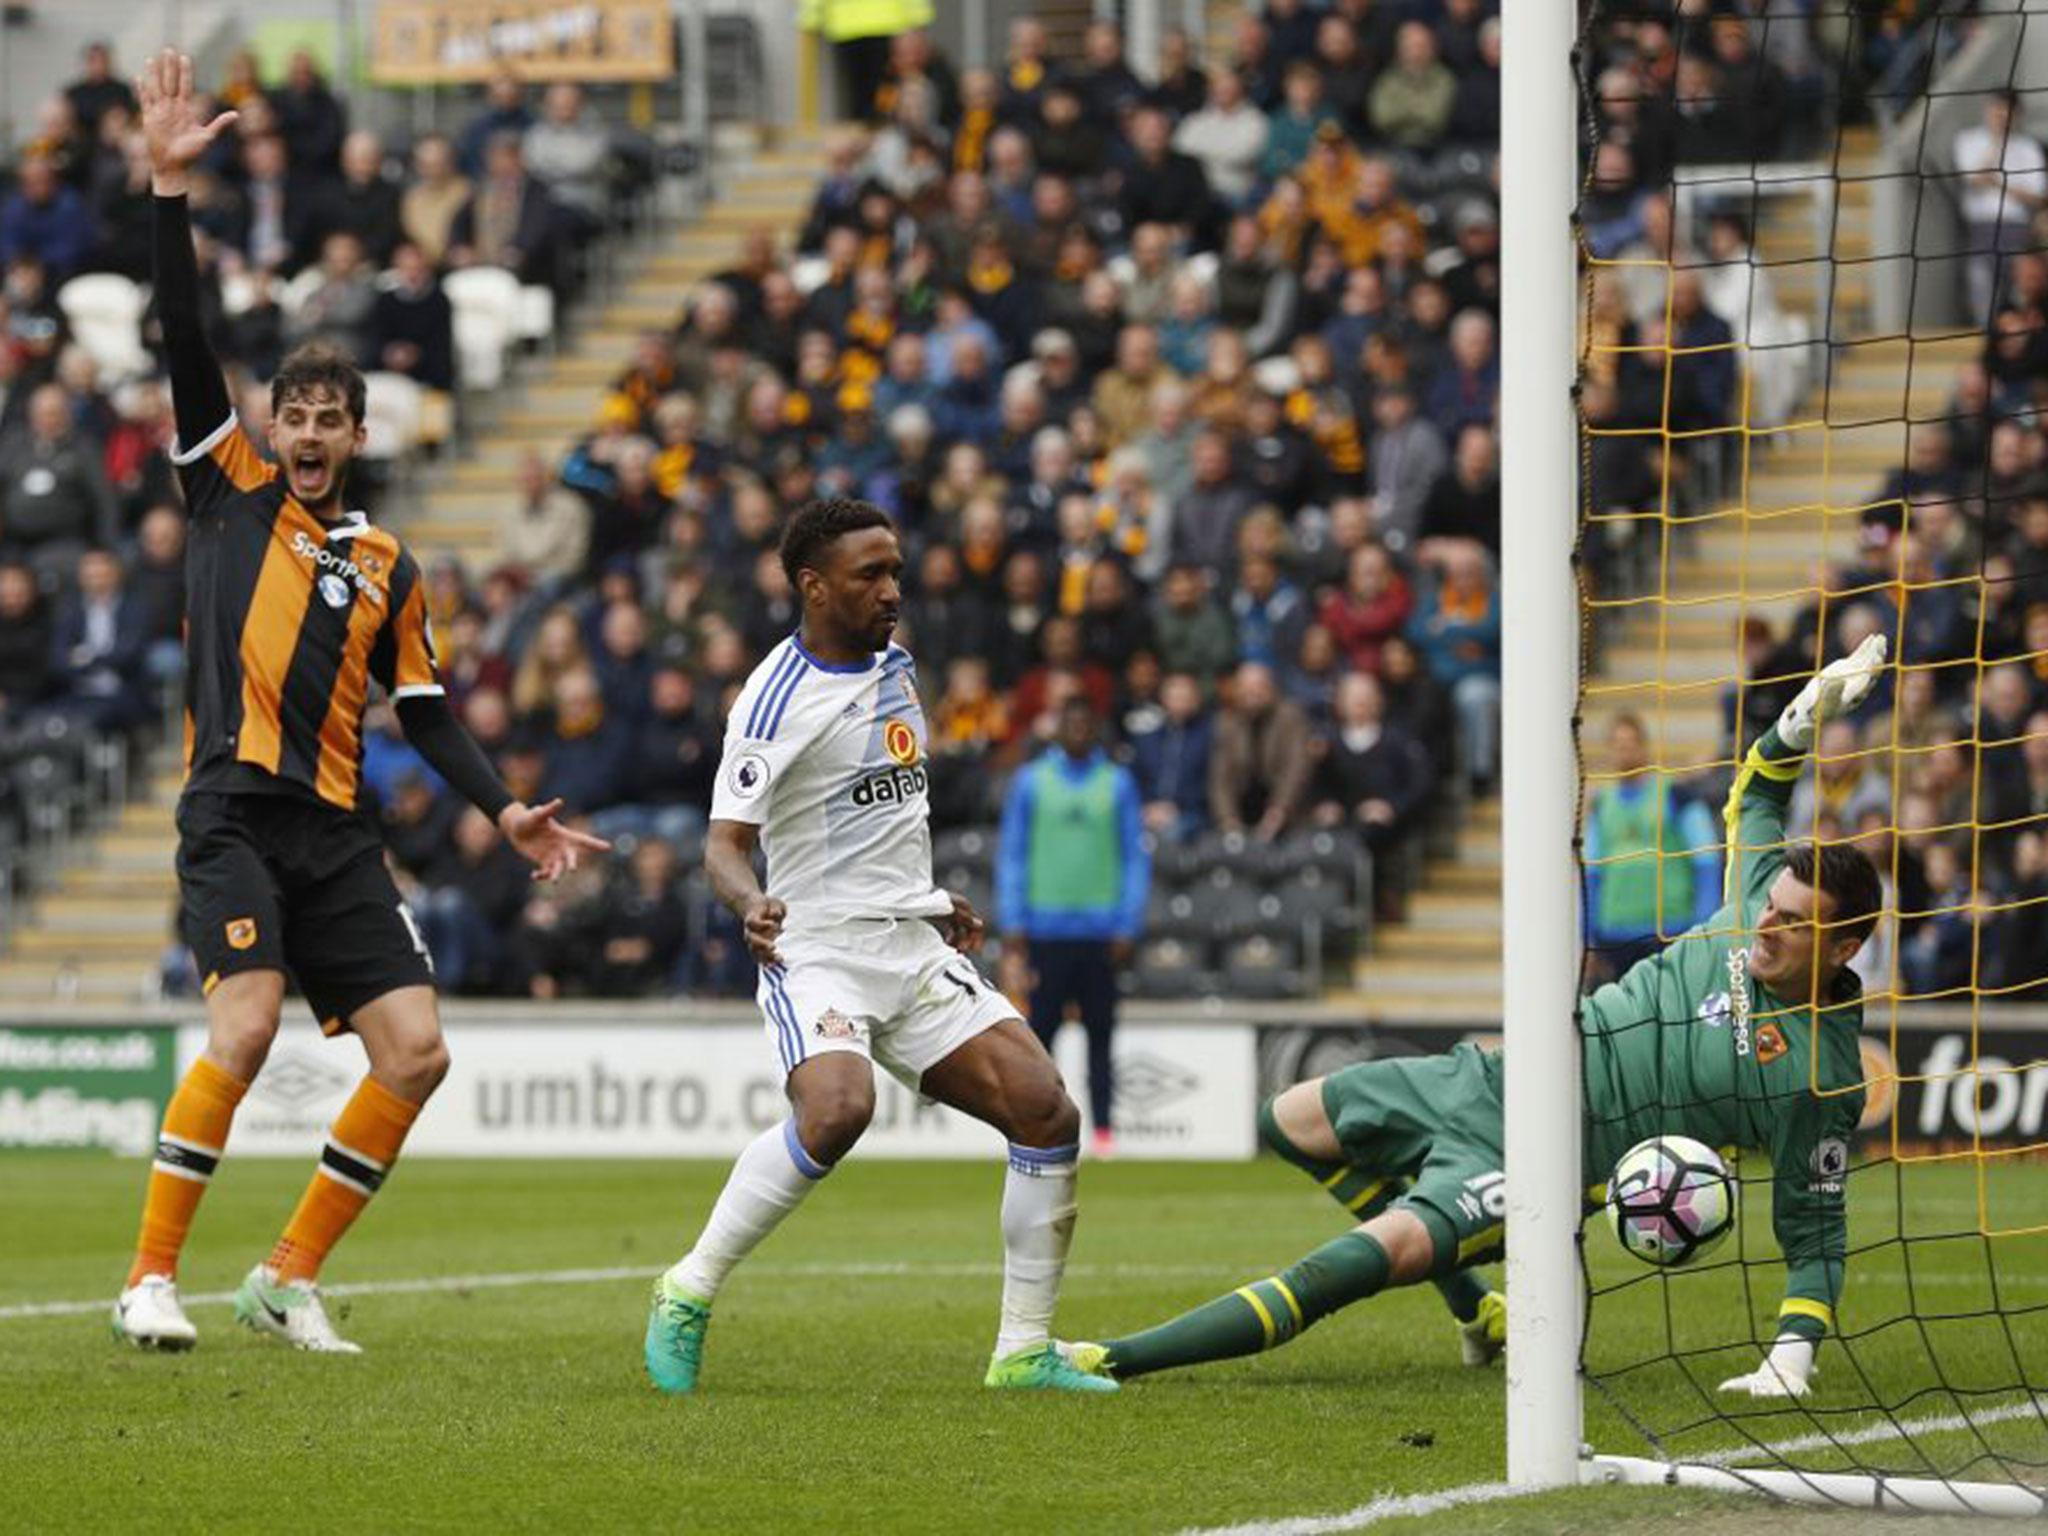 Jermain Defoe scored Sunderland's second to secure a rare 2-0 victory over Hull